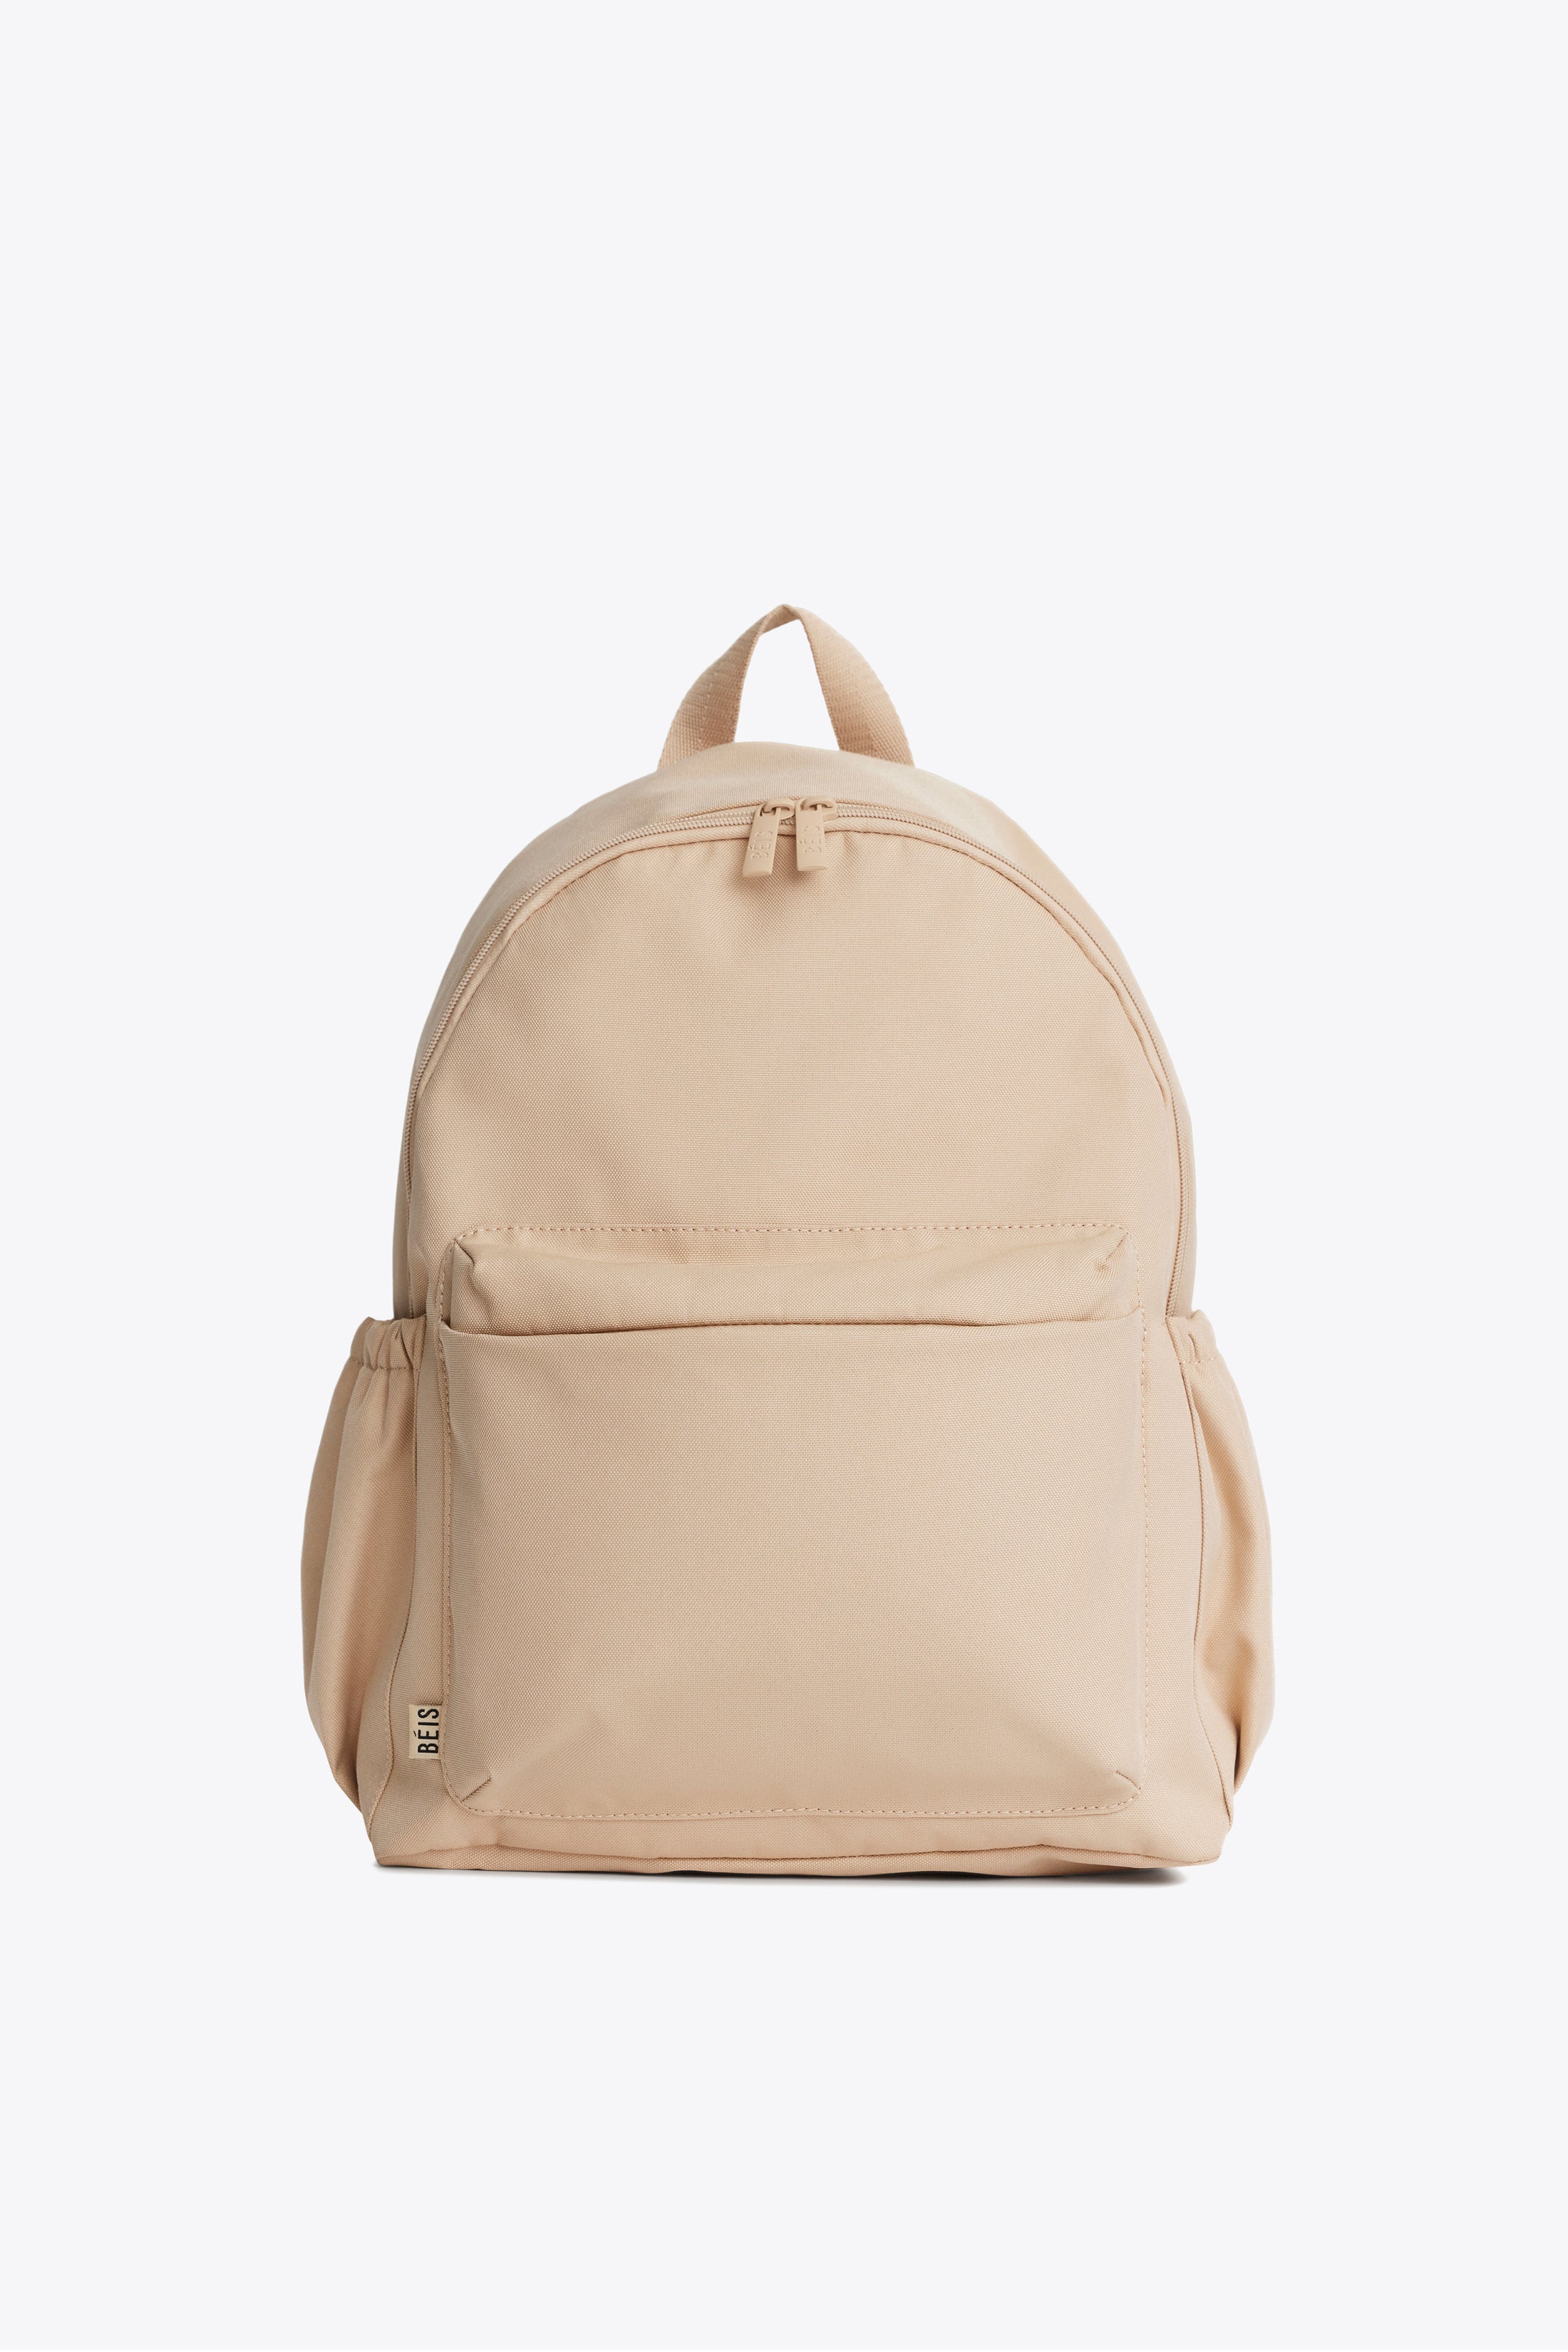 BÉIS 'The BEISICS Backpack' in Beige - Backpack For Work & Travel With ...